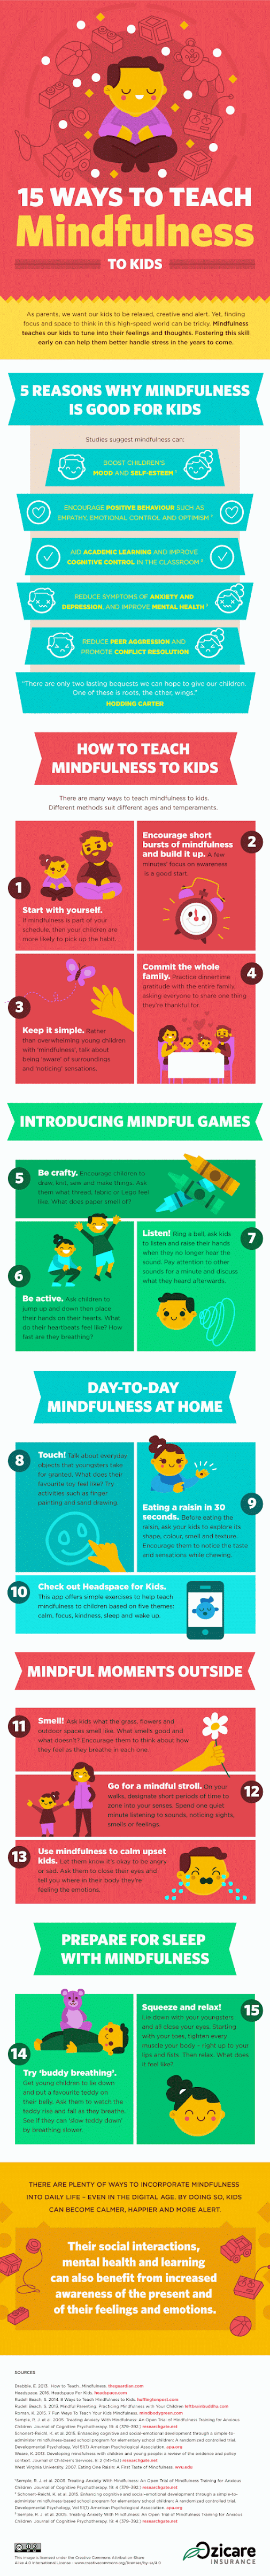 http://www.ozicare.com.au/images/insights/life/15-Ways-To-Teach-Mindfulness-To-Kids.png